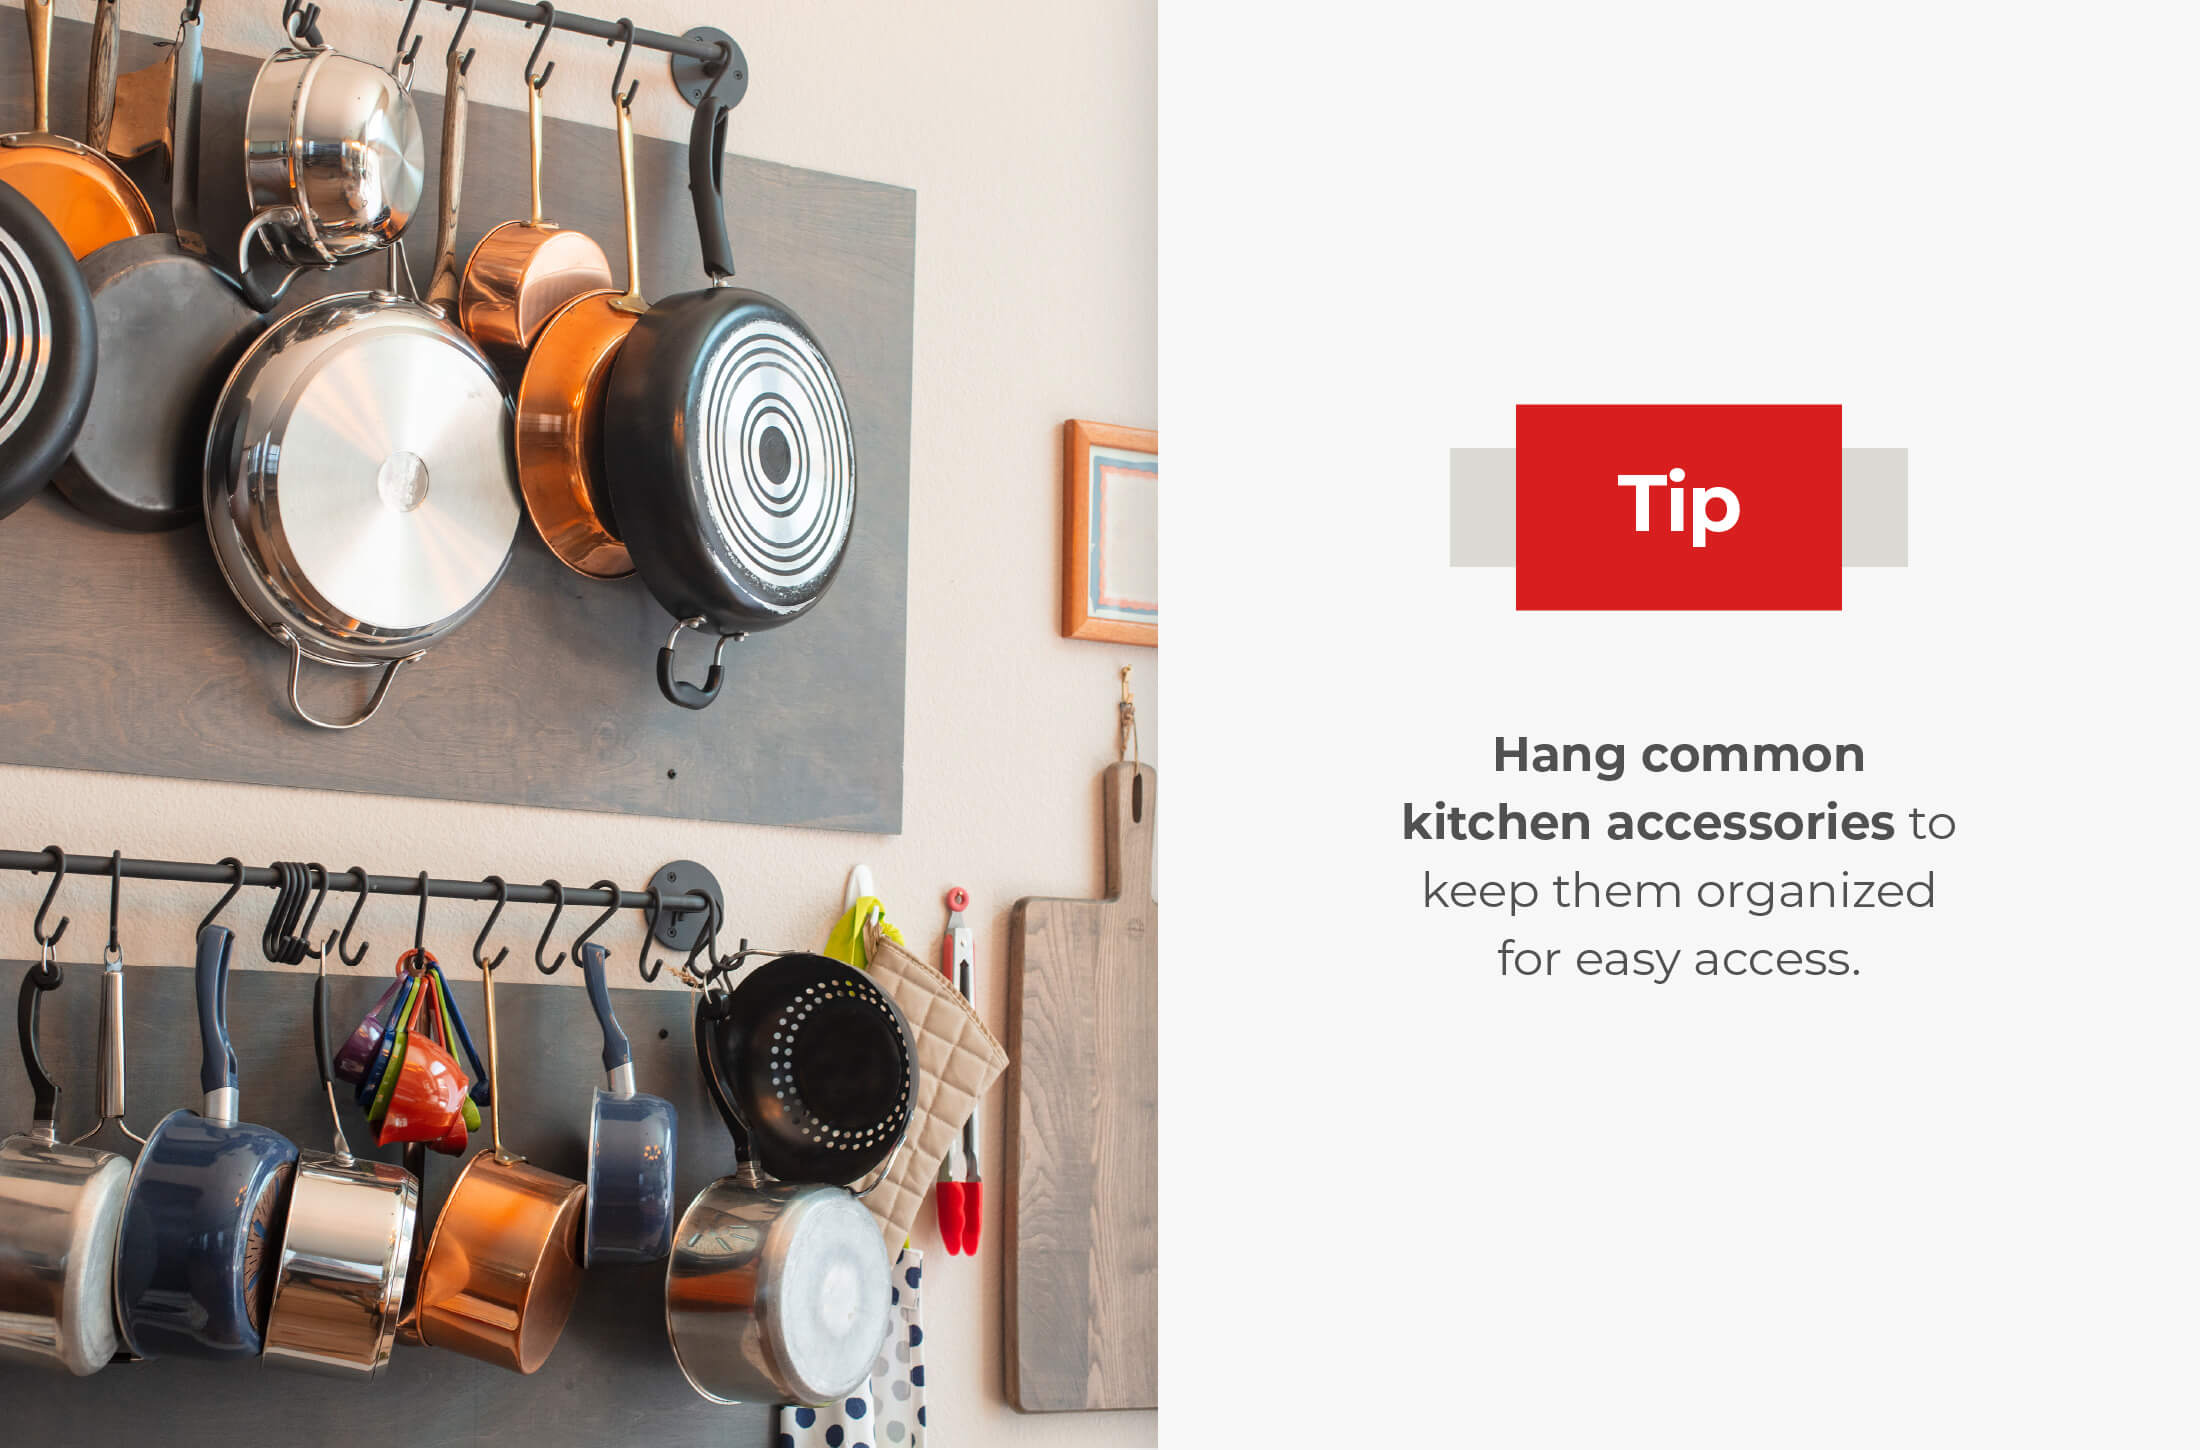 Hang common kitchen accessories to keep them organized for easy access.